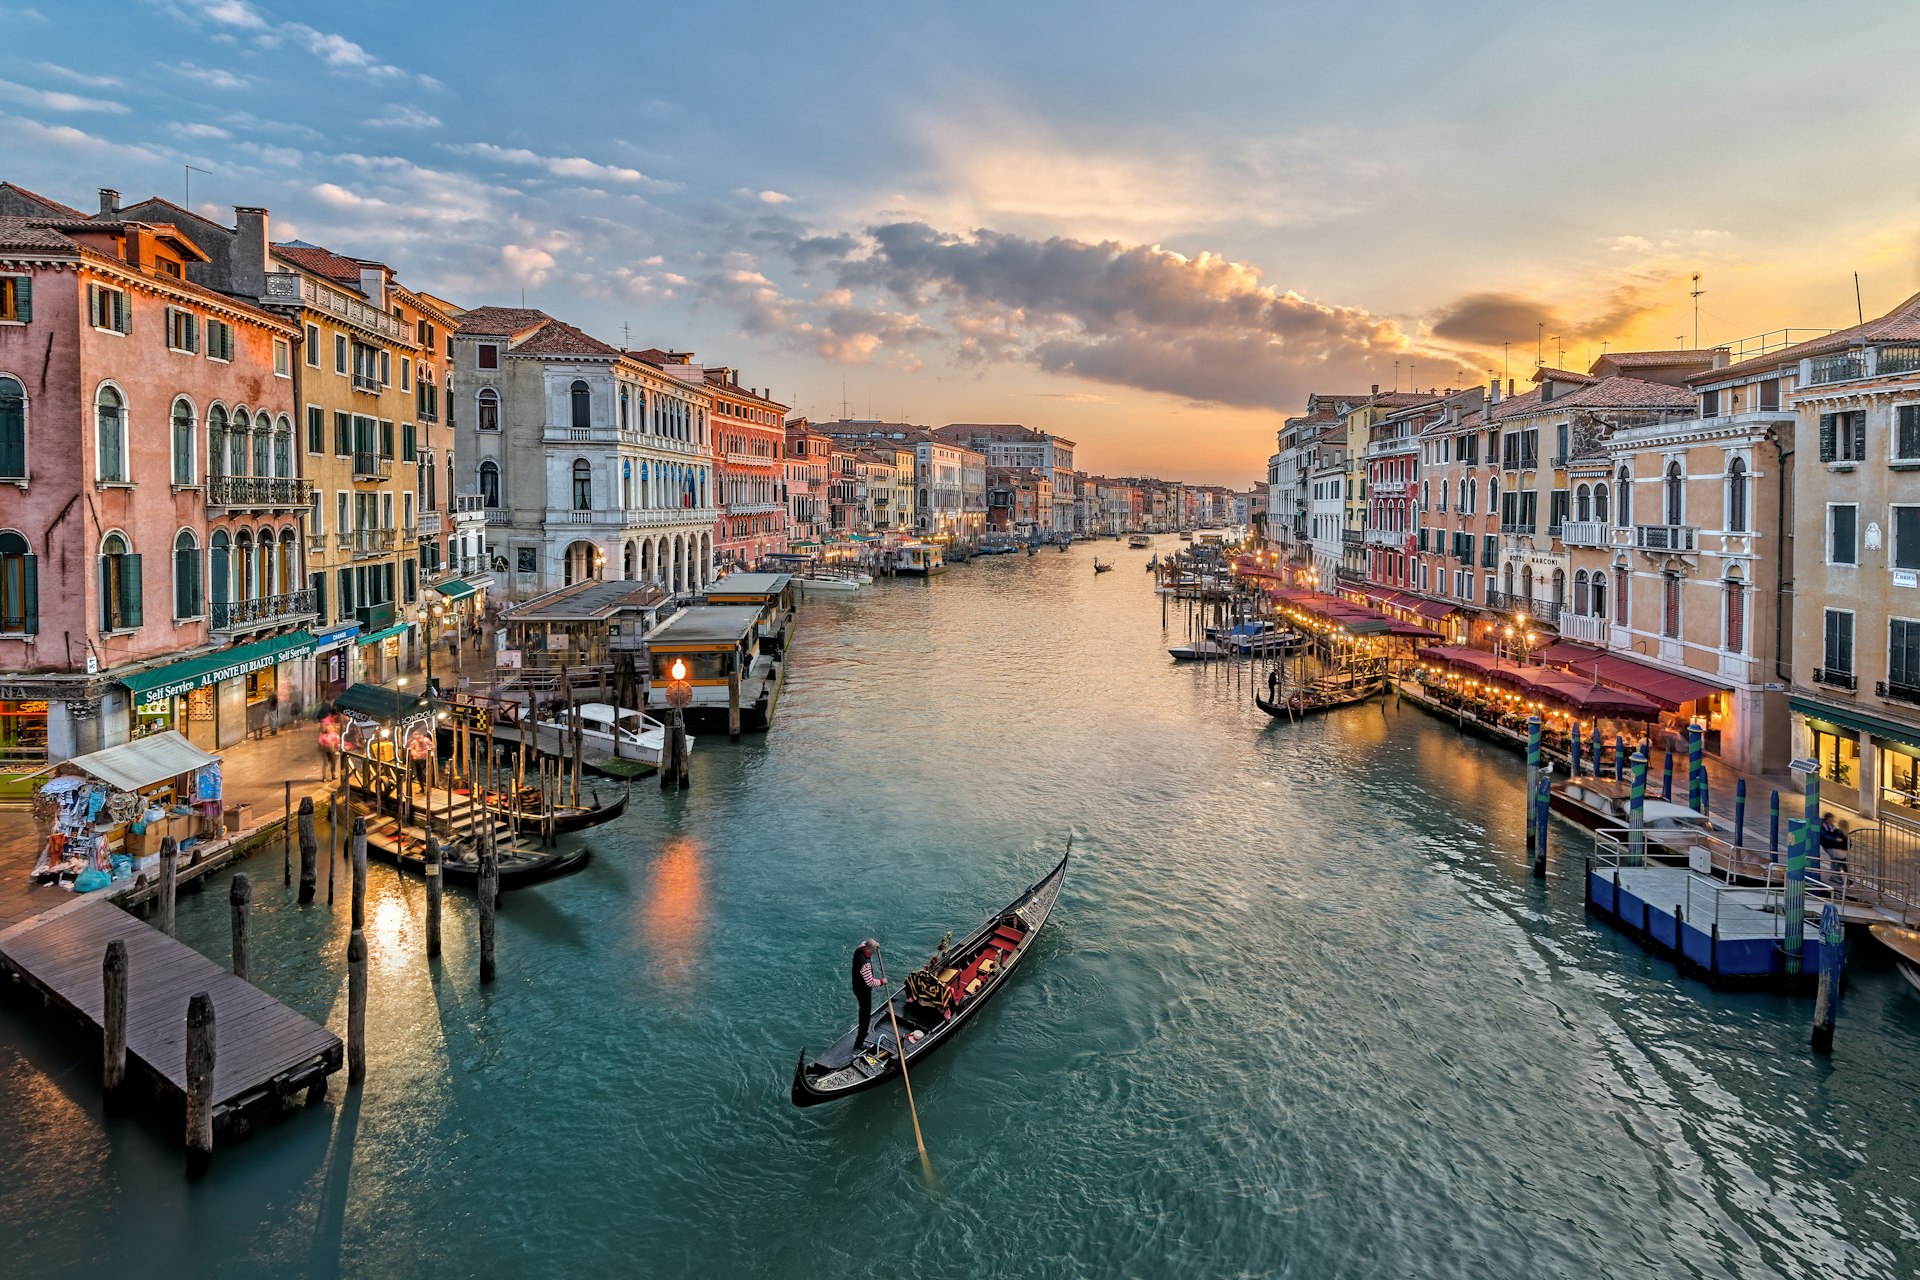 A gondola floats down a wide canal in Venice, Italy, at sunset. The canal is lined with cafes and bars where people sit outside, with boats tied up to the canal edge.